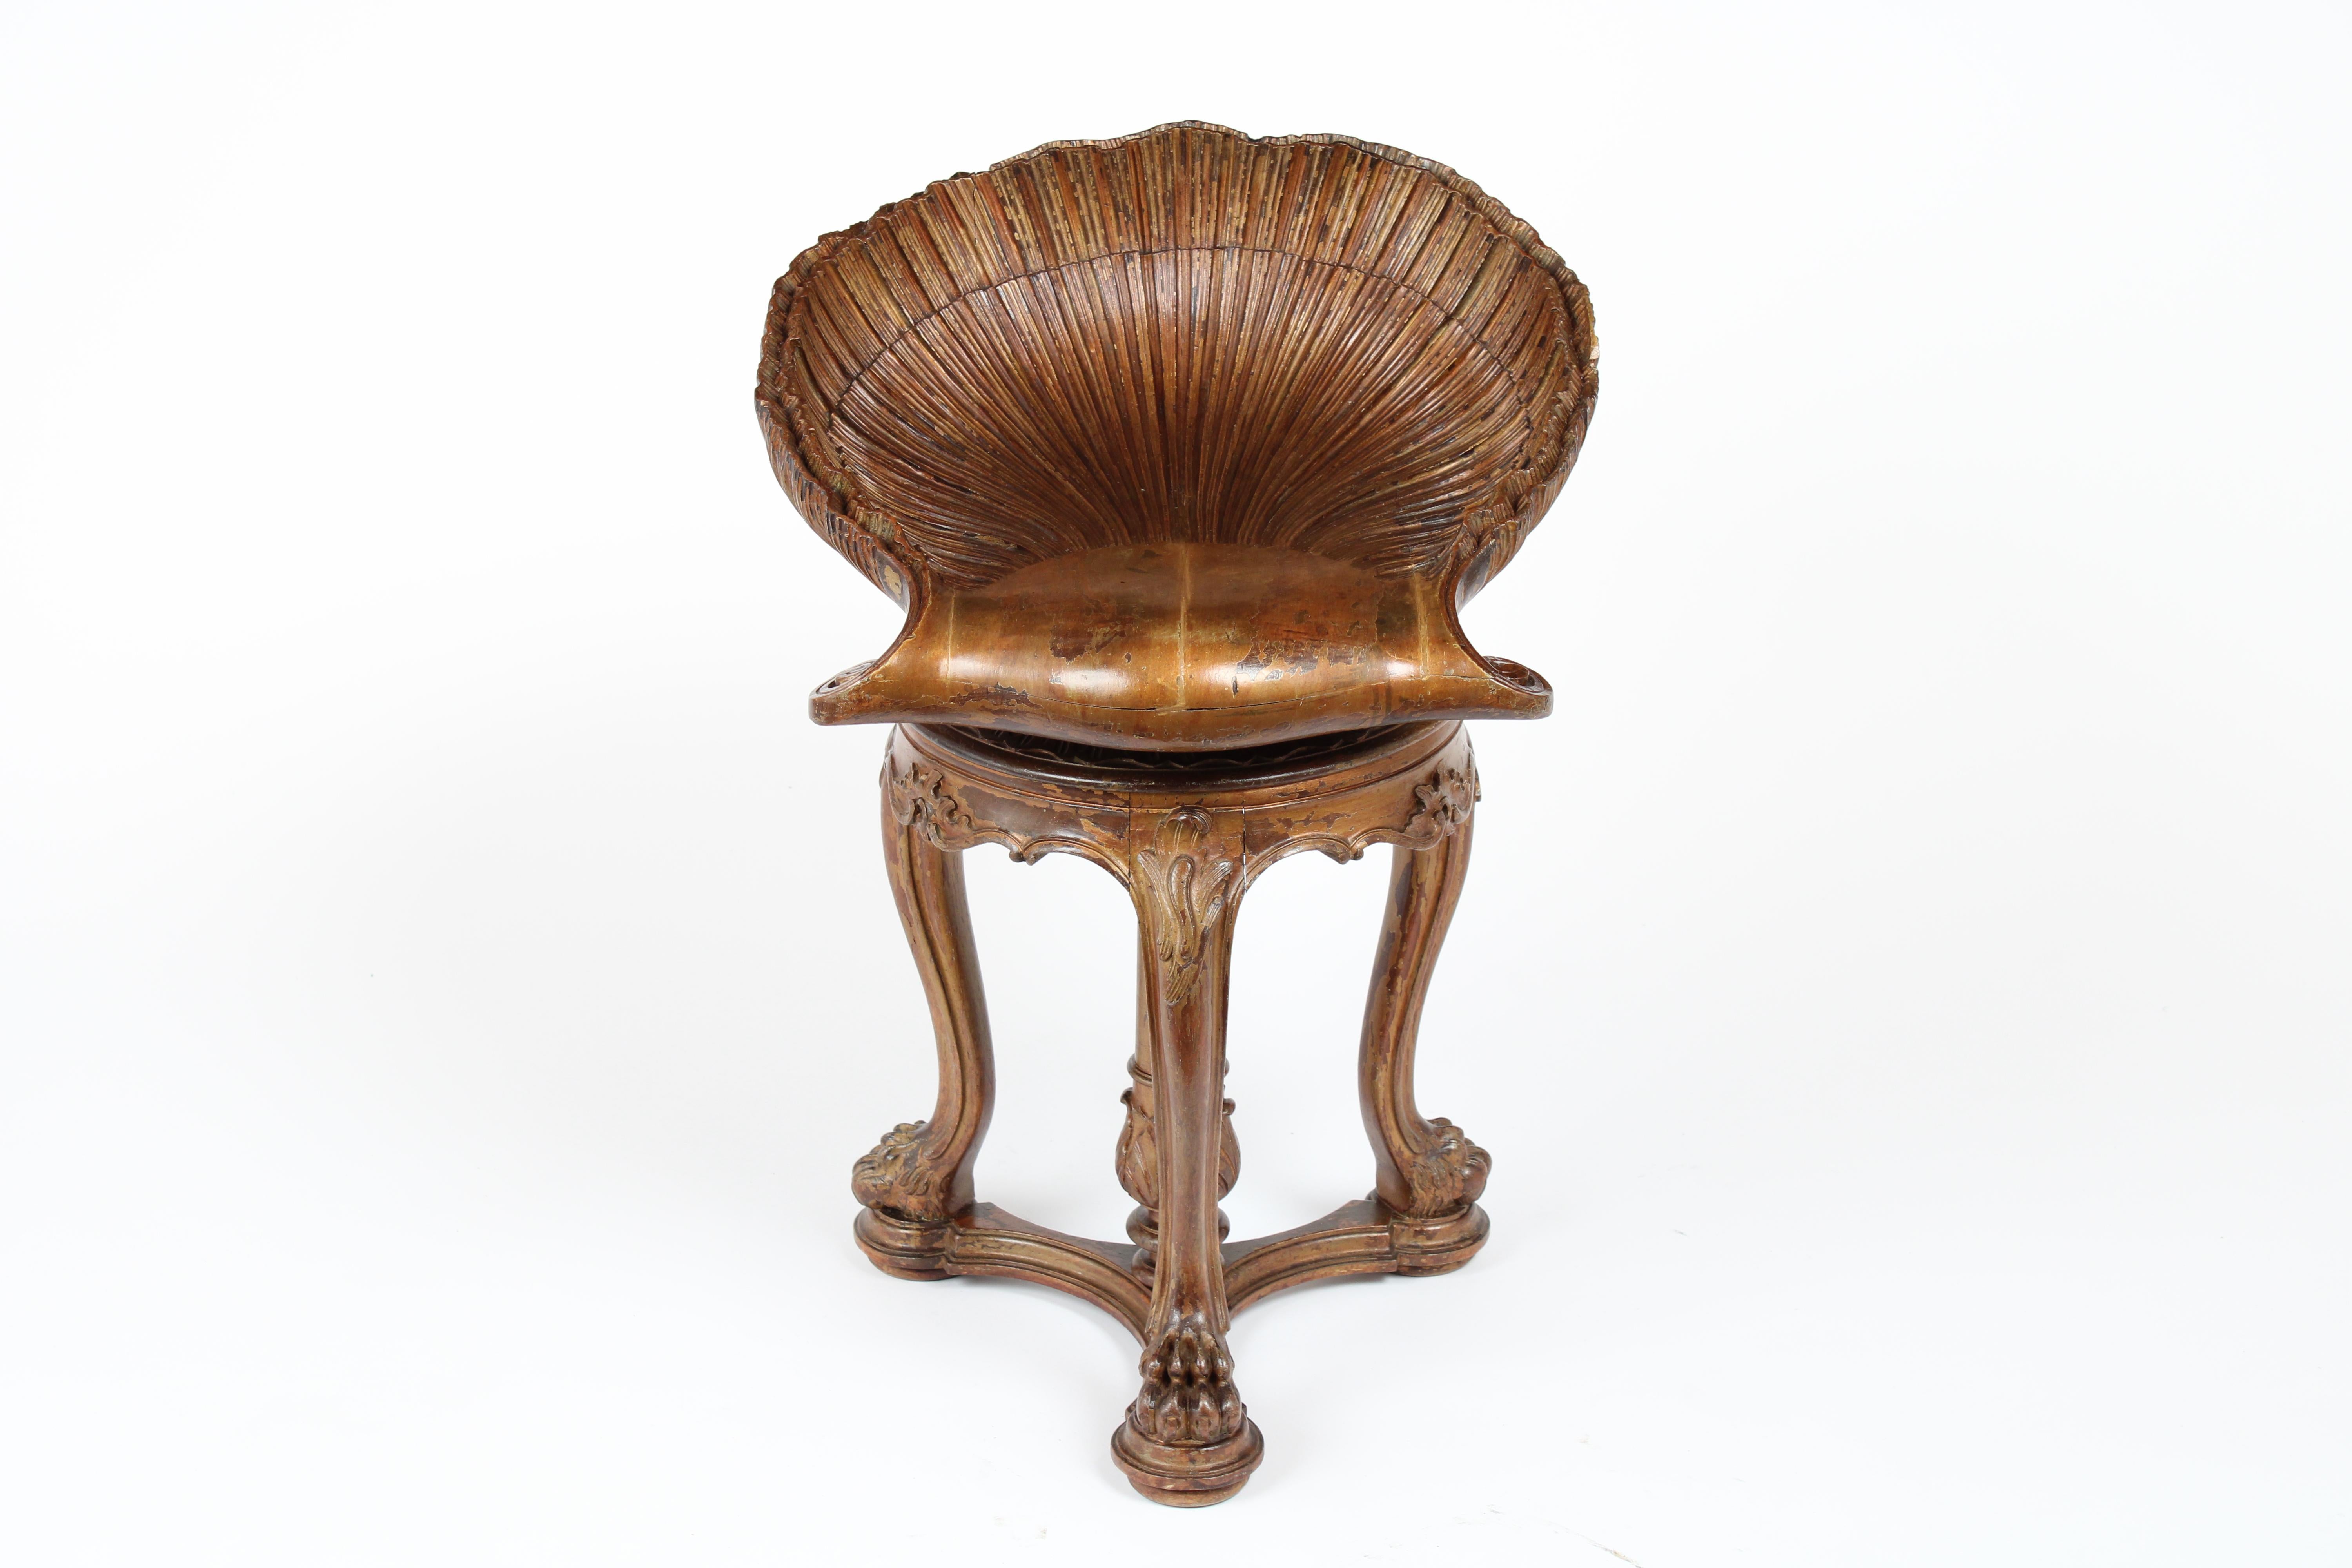 Unique Venetian late 19th century Grotto style piano stool is made out walnut wood this bench feature an incredible hand carved shell design adjustable seat, this stool is very sturdy with the stretch pedestal finishes with carved claw feets details.